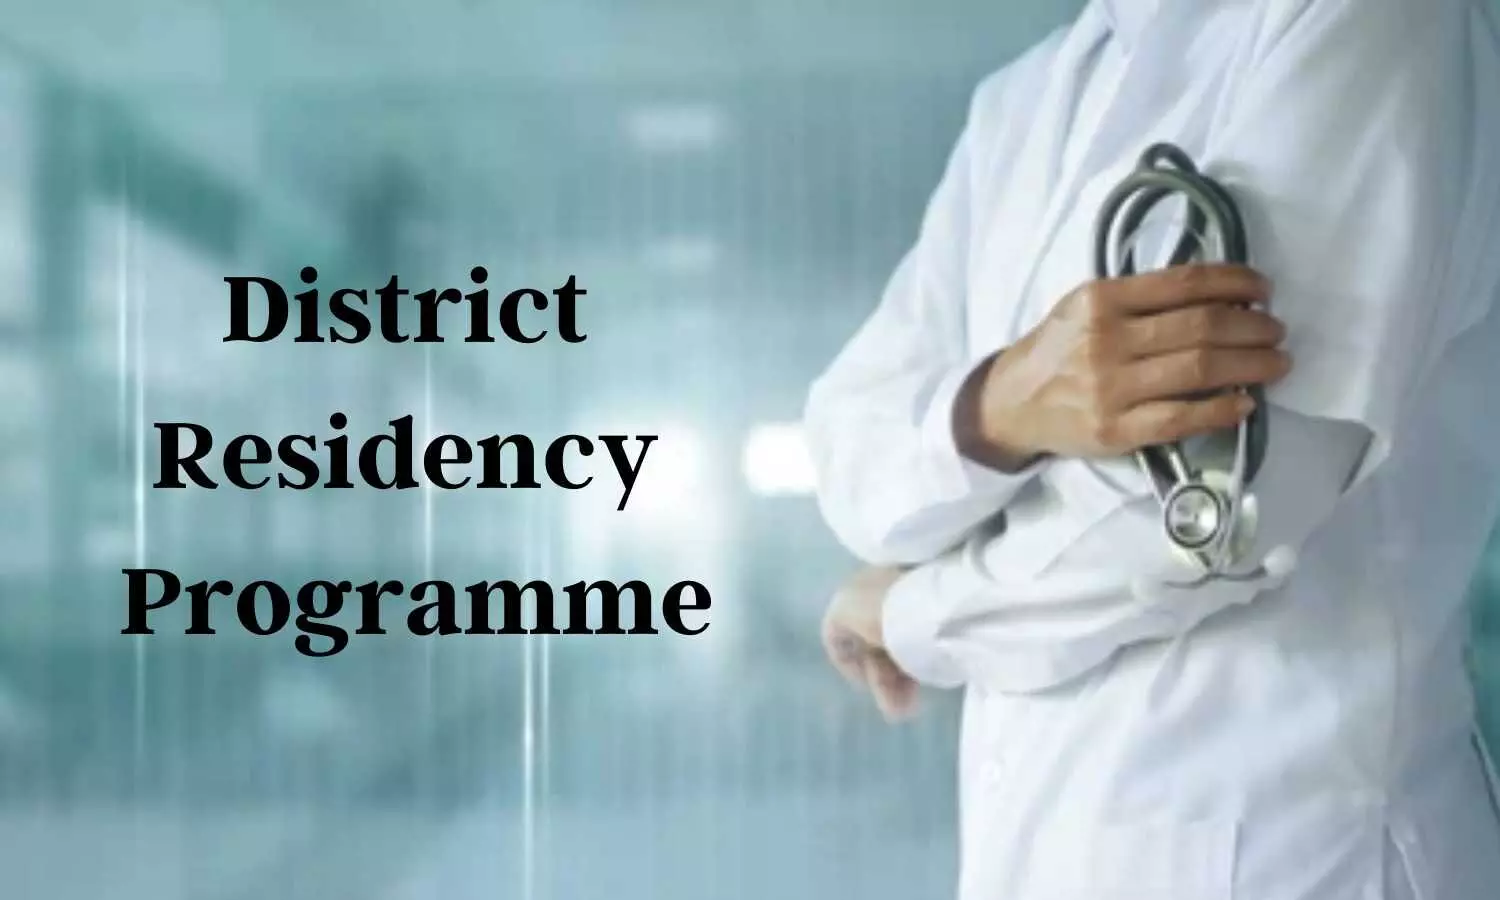 Got Doubts regarding District Residency Programme? Check out the clarification issued by NMC